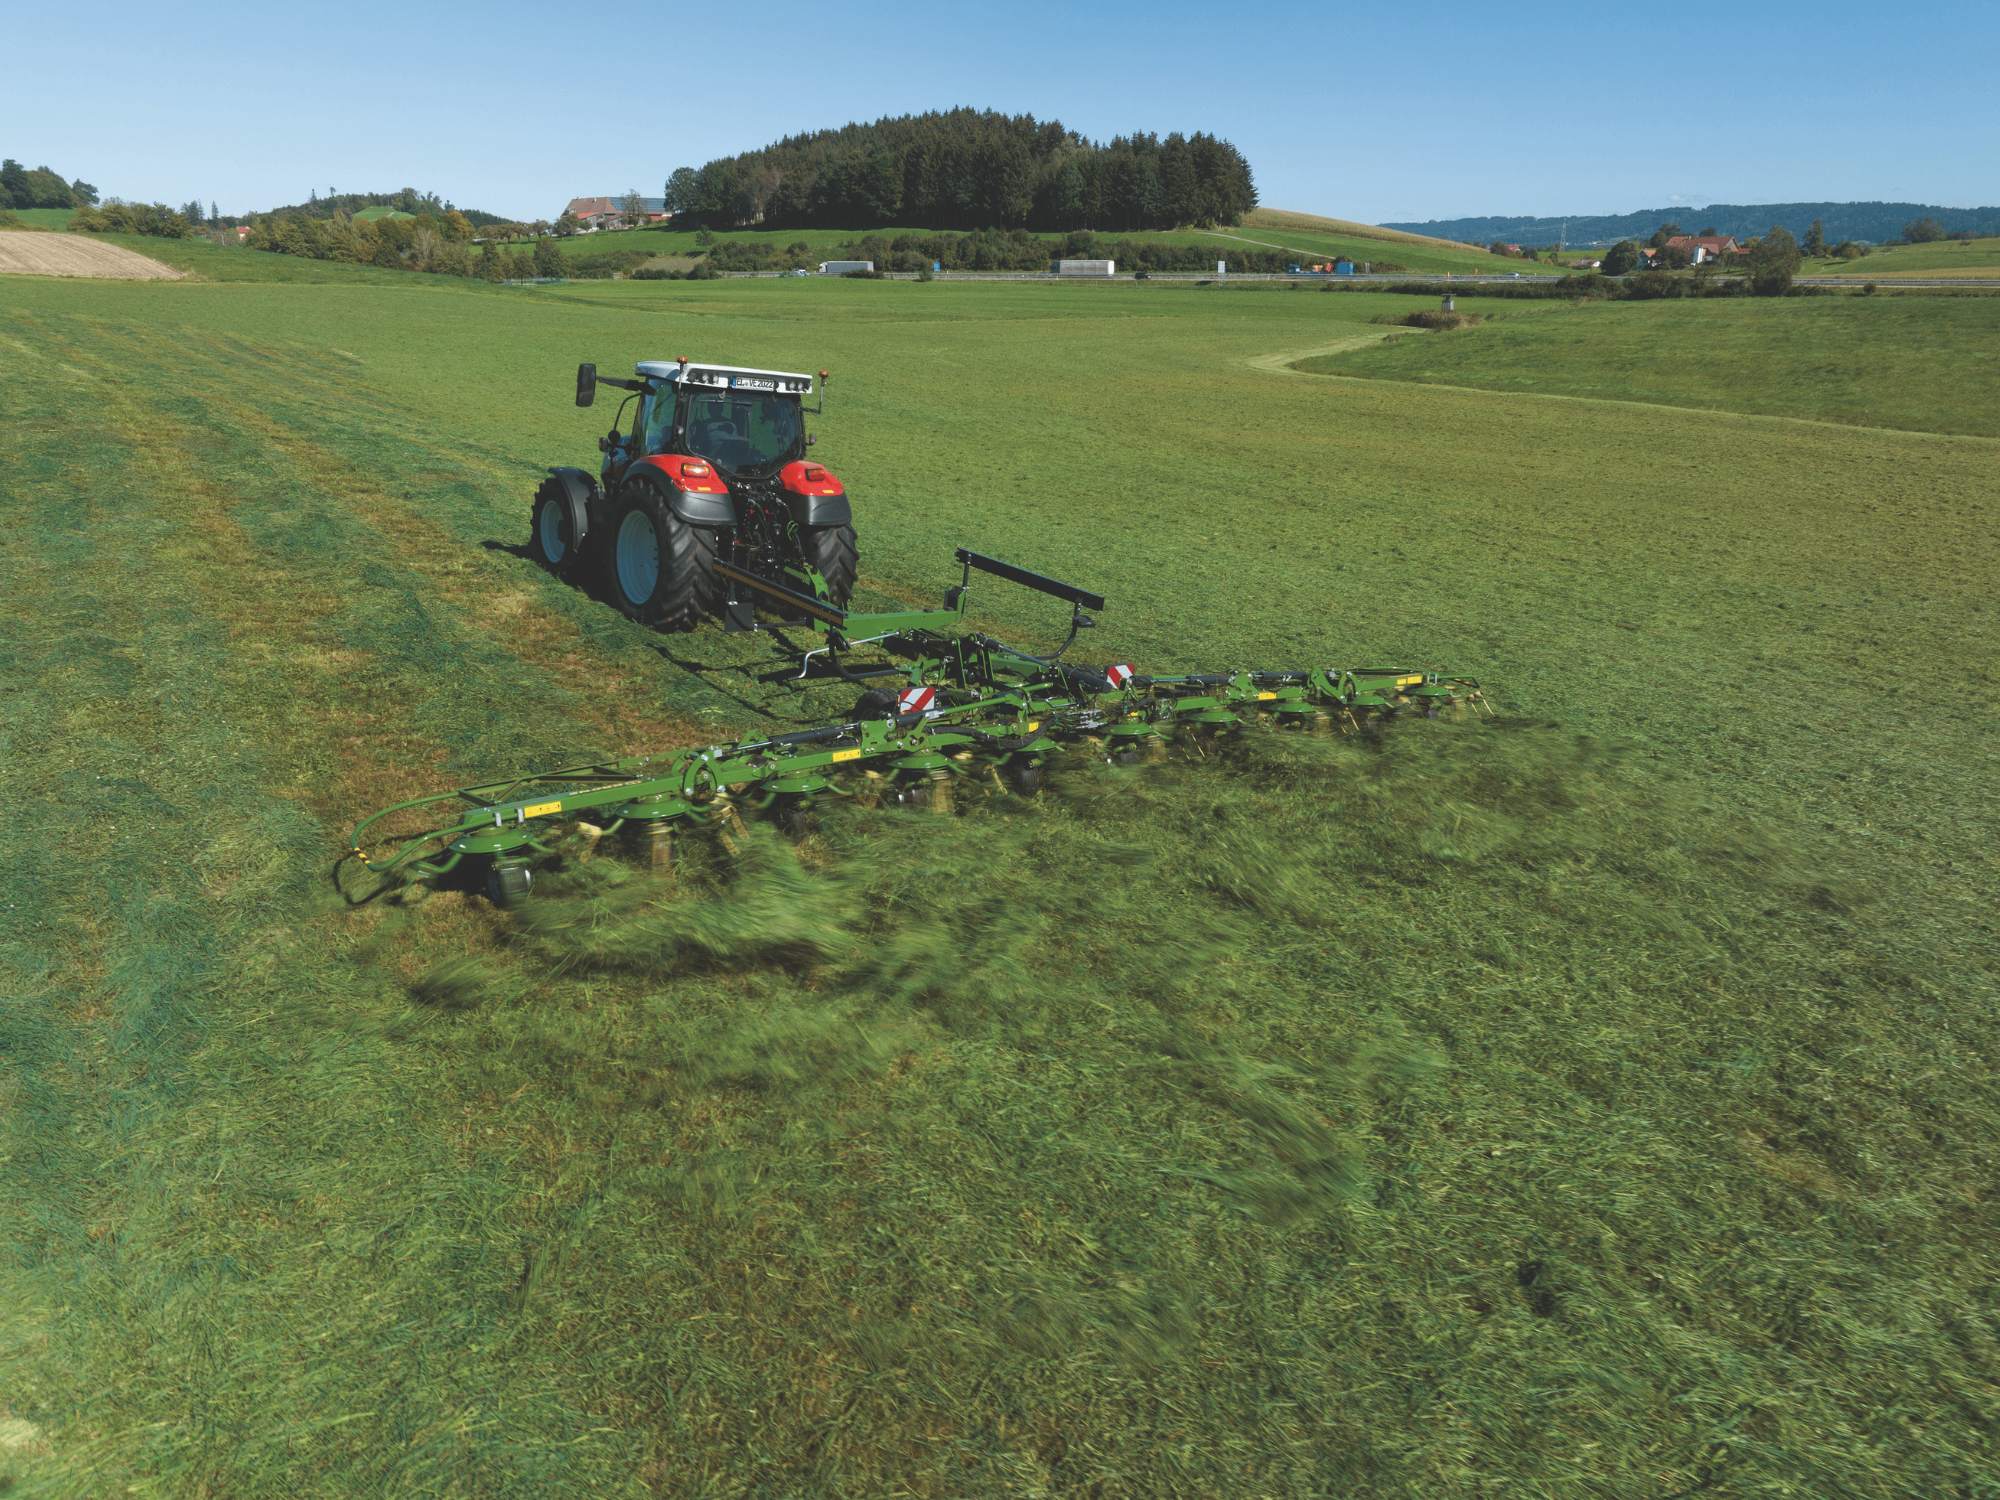 Adjust spreading angle to suit conditions